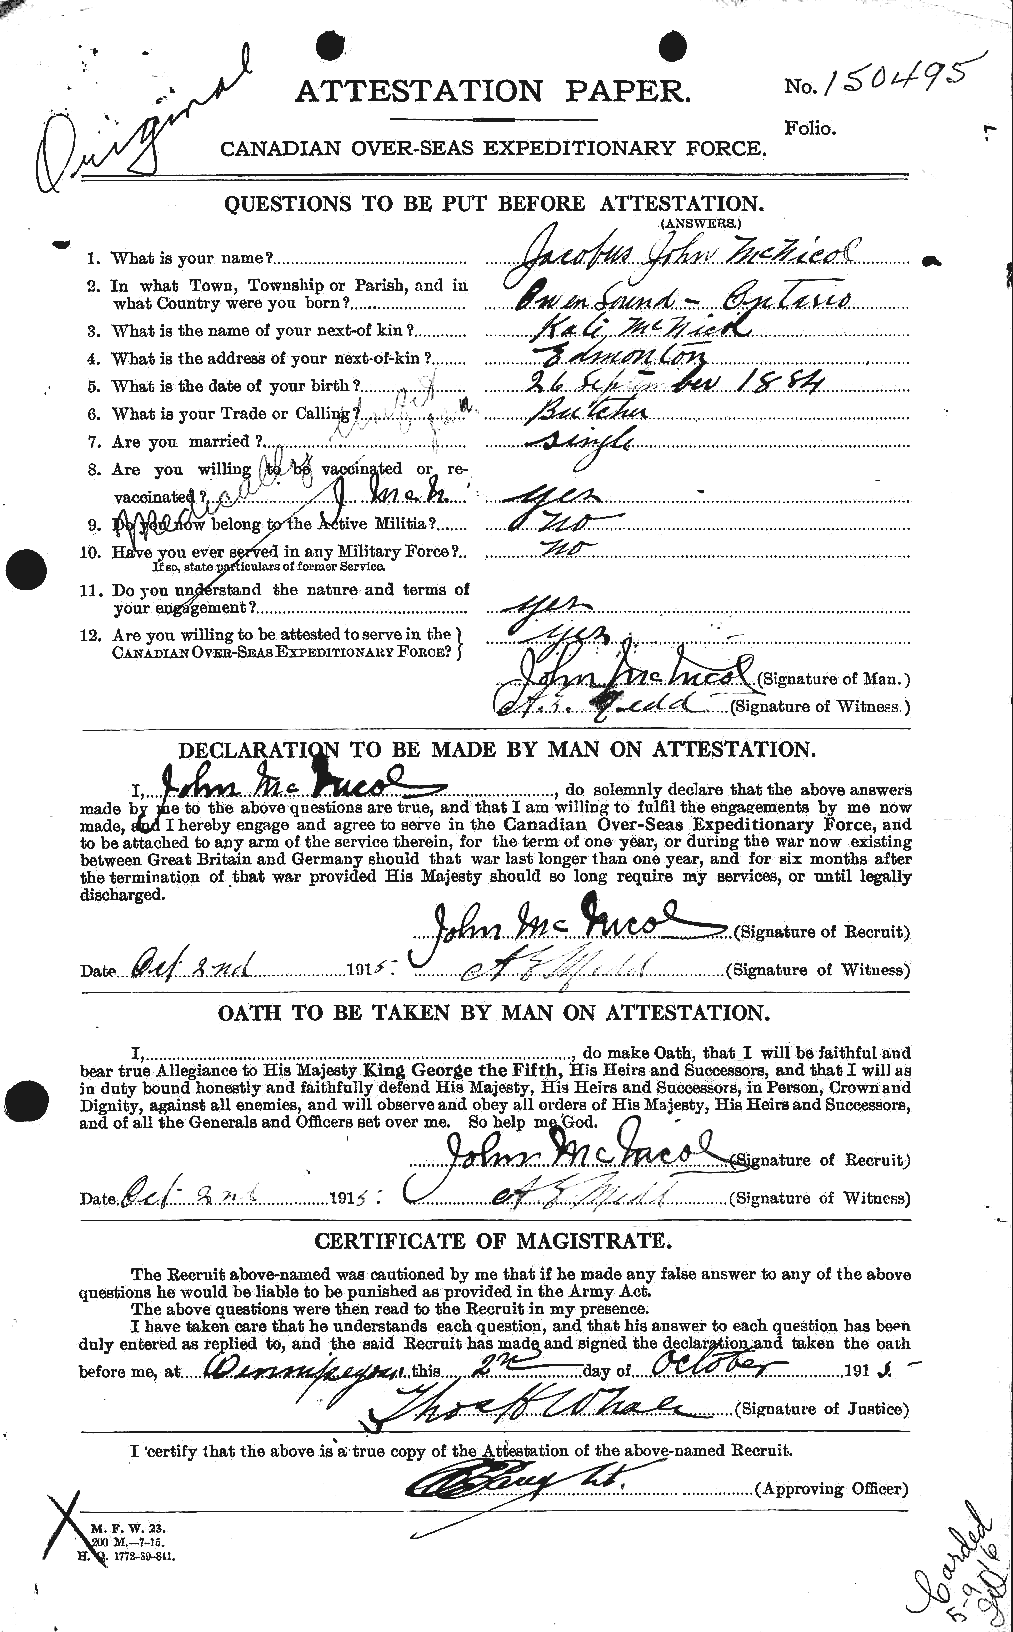 Personnel Records of the First World War - CEF 539202a